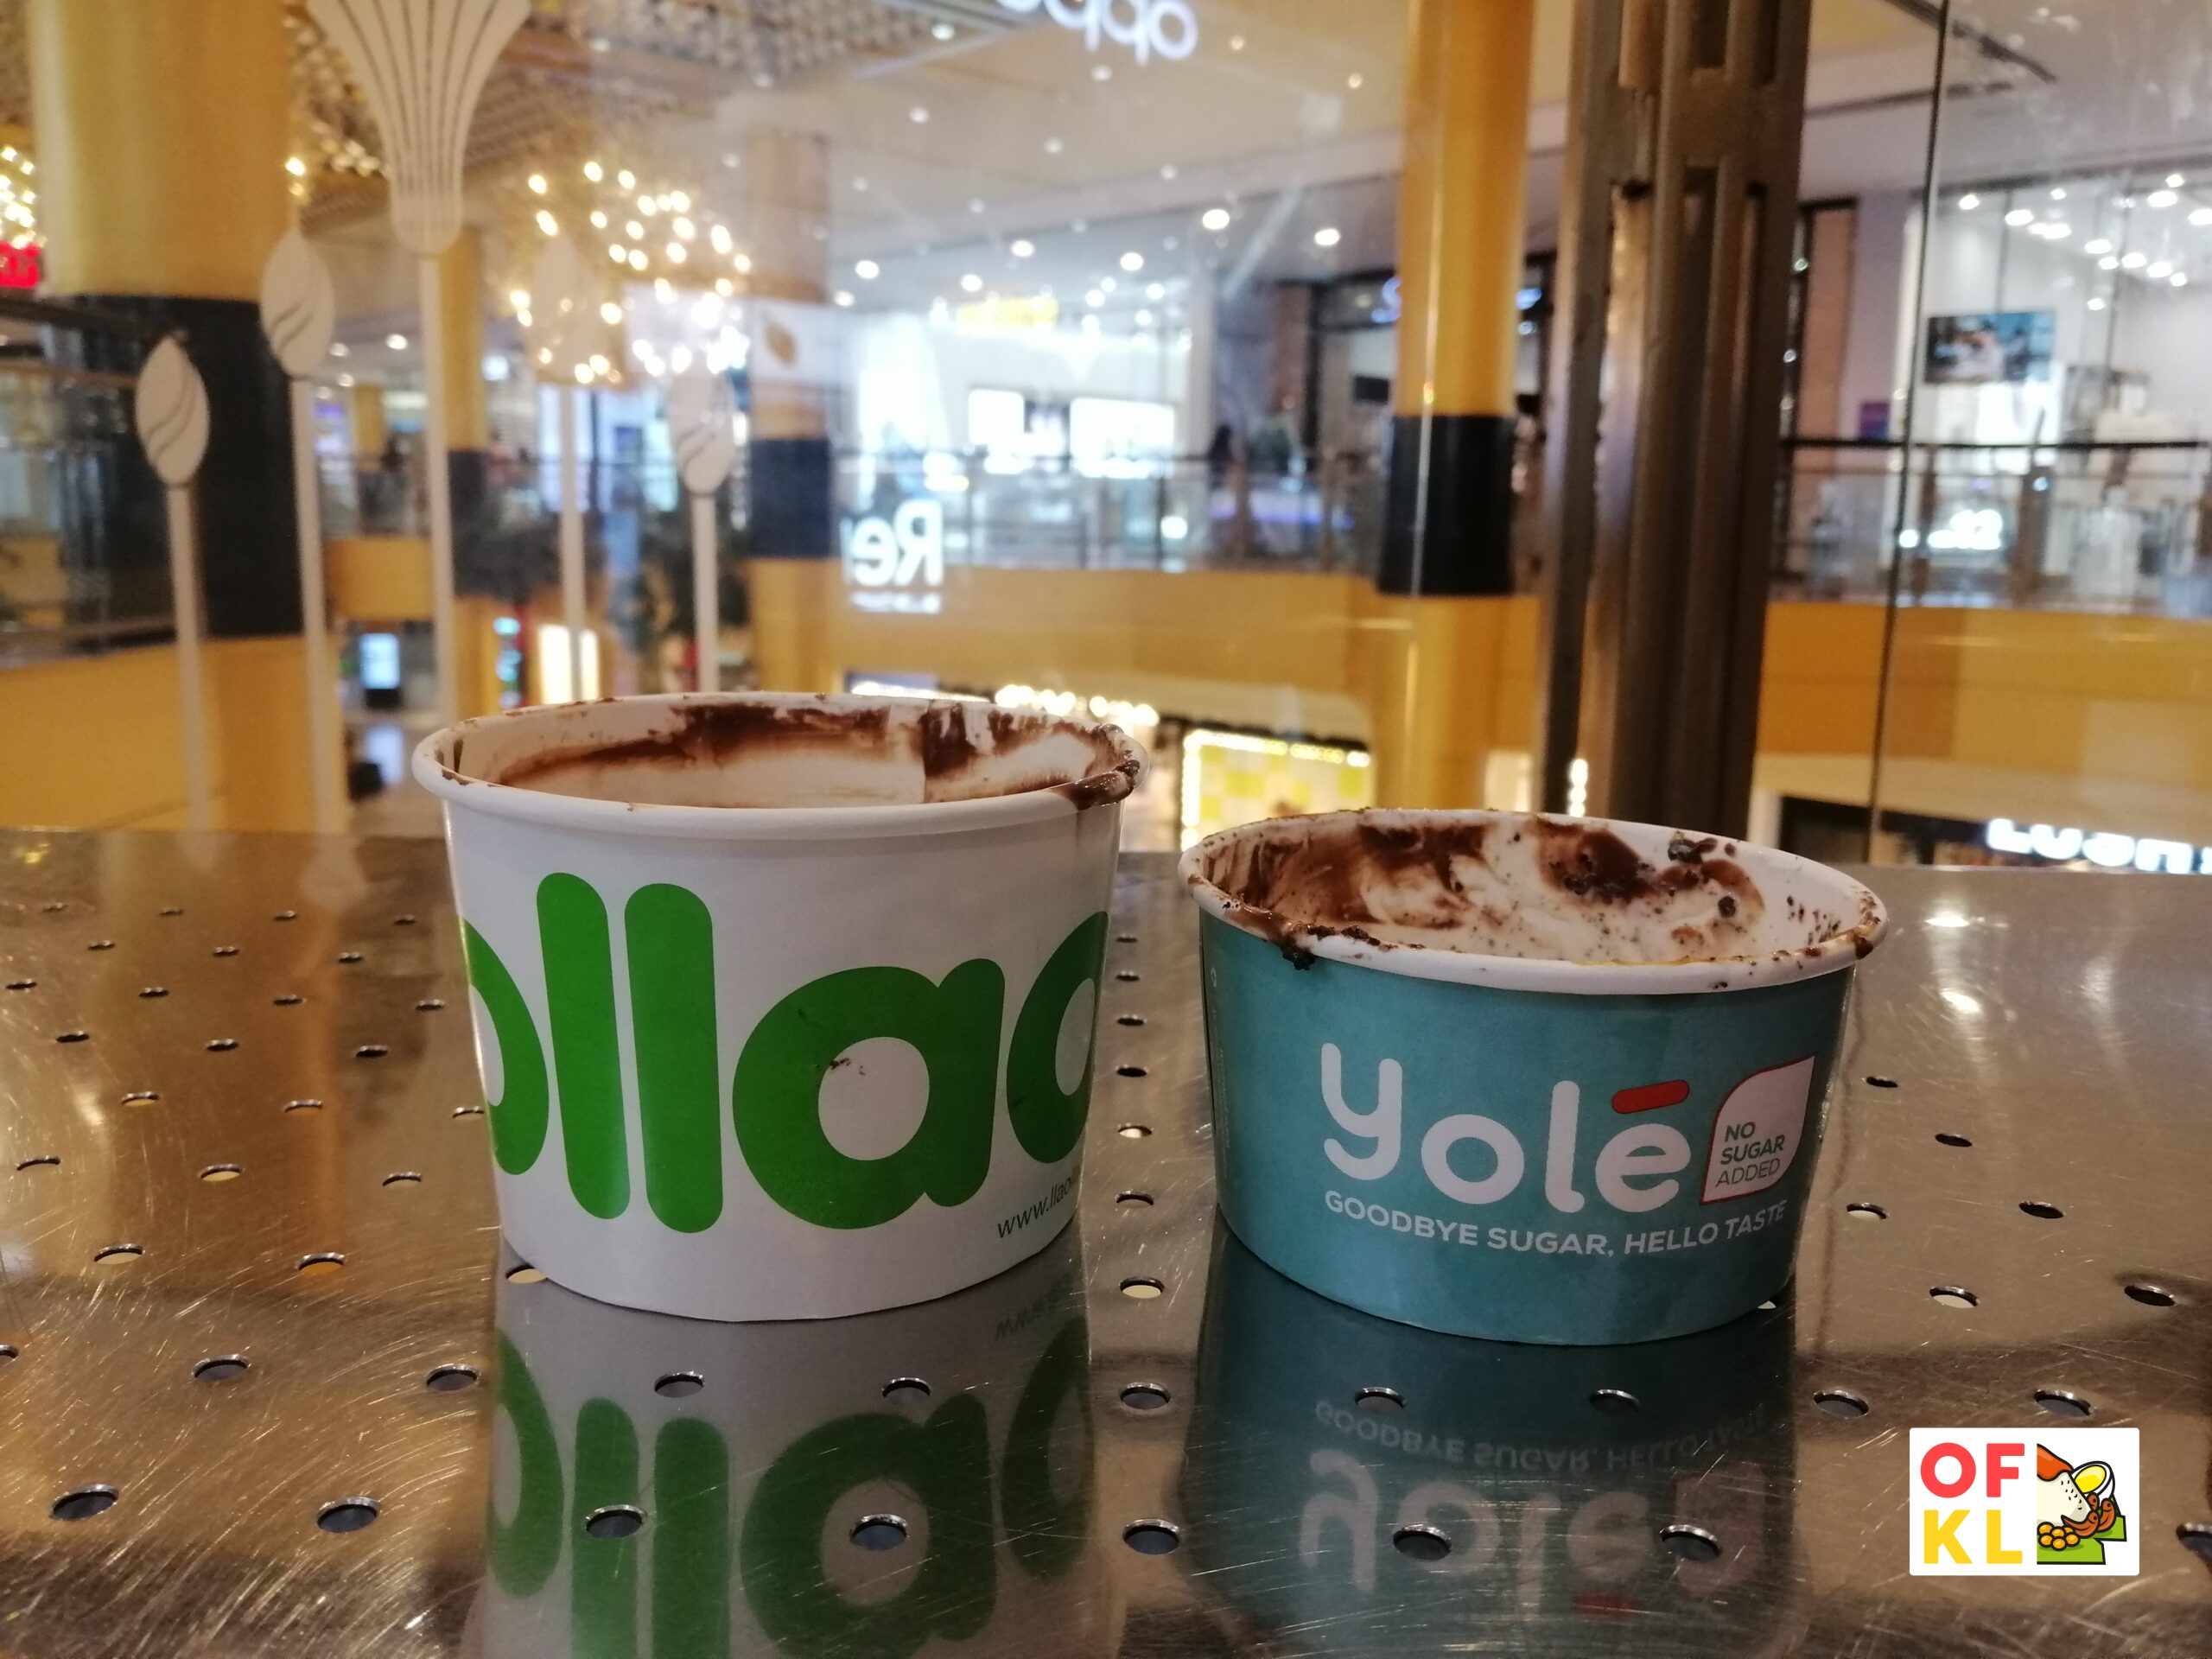 Comparing llaollao and Yolé, which is better? | OnlyFoodKL